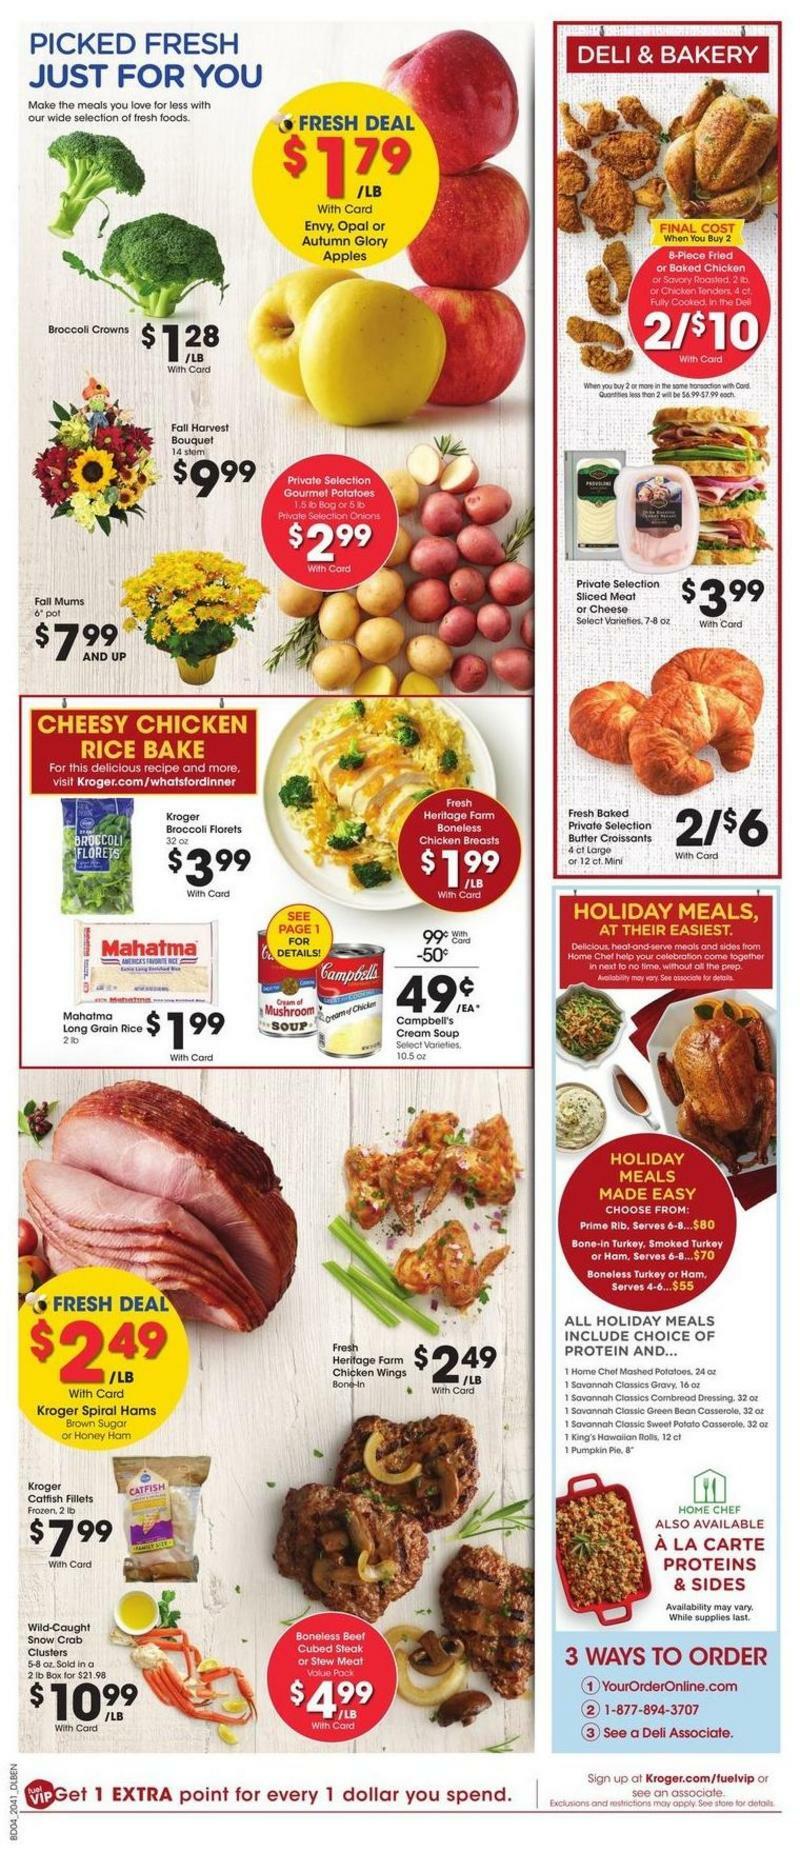 Kroger Weekly Ad from November 11